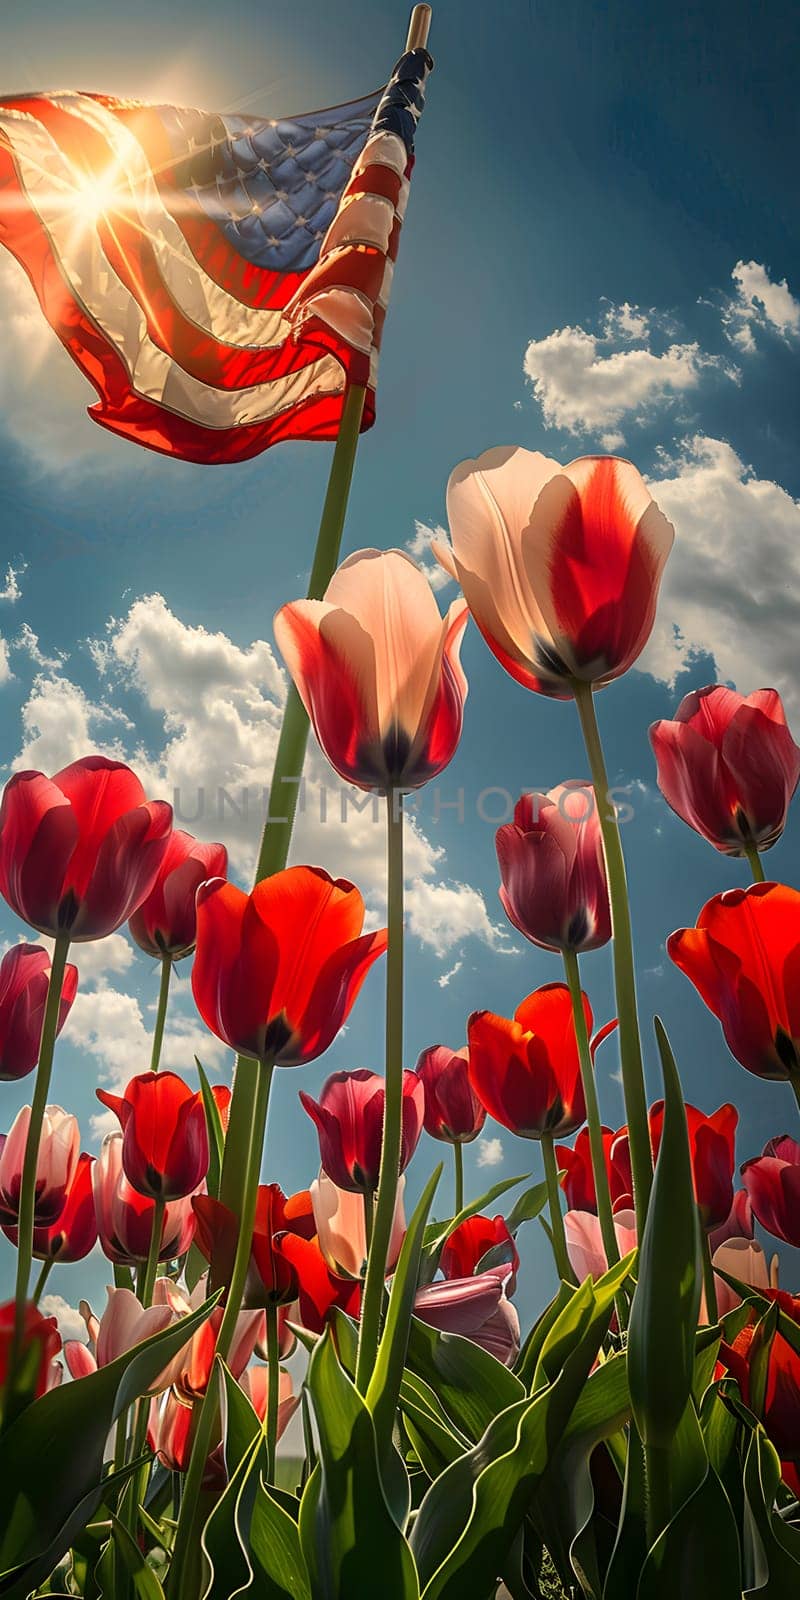 A picturesque field of red and white tulips with an American flag fluttering in the background, set against a sky dotted with fluffy clouds